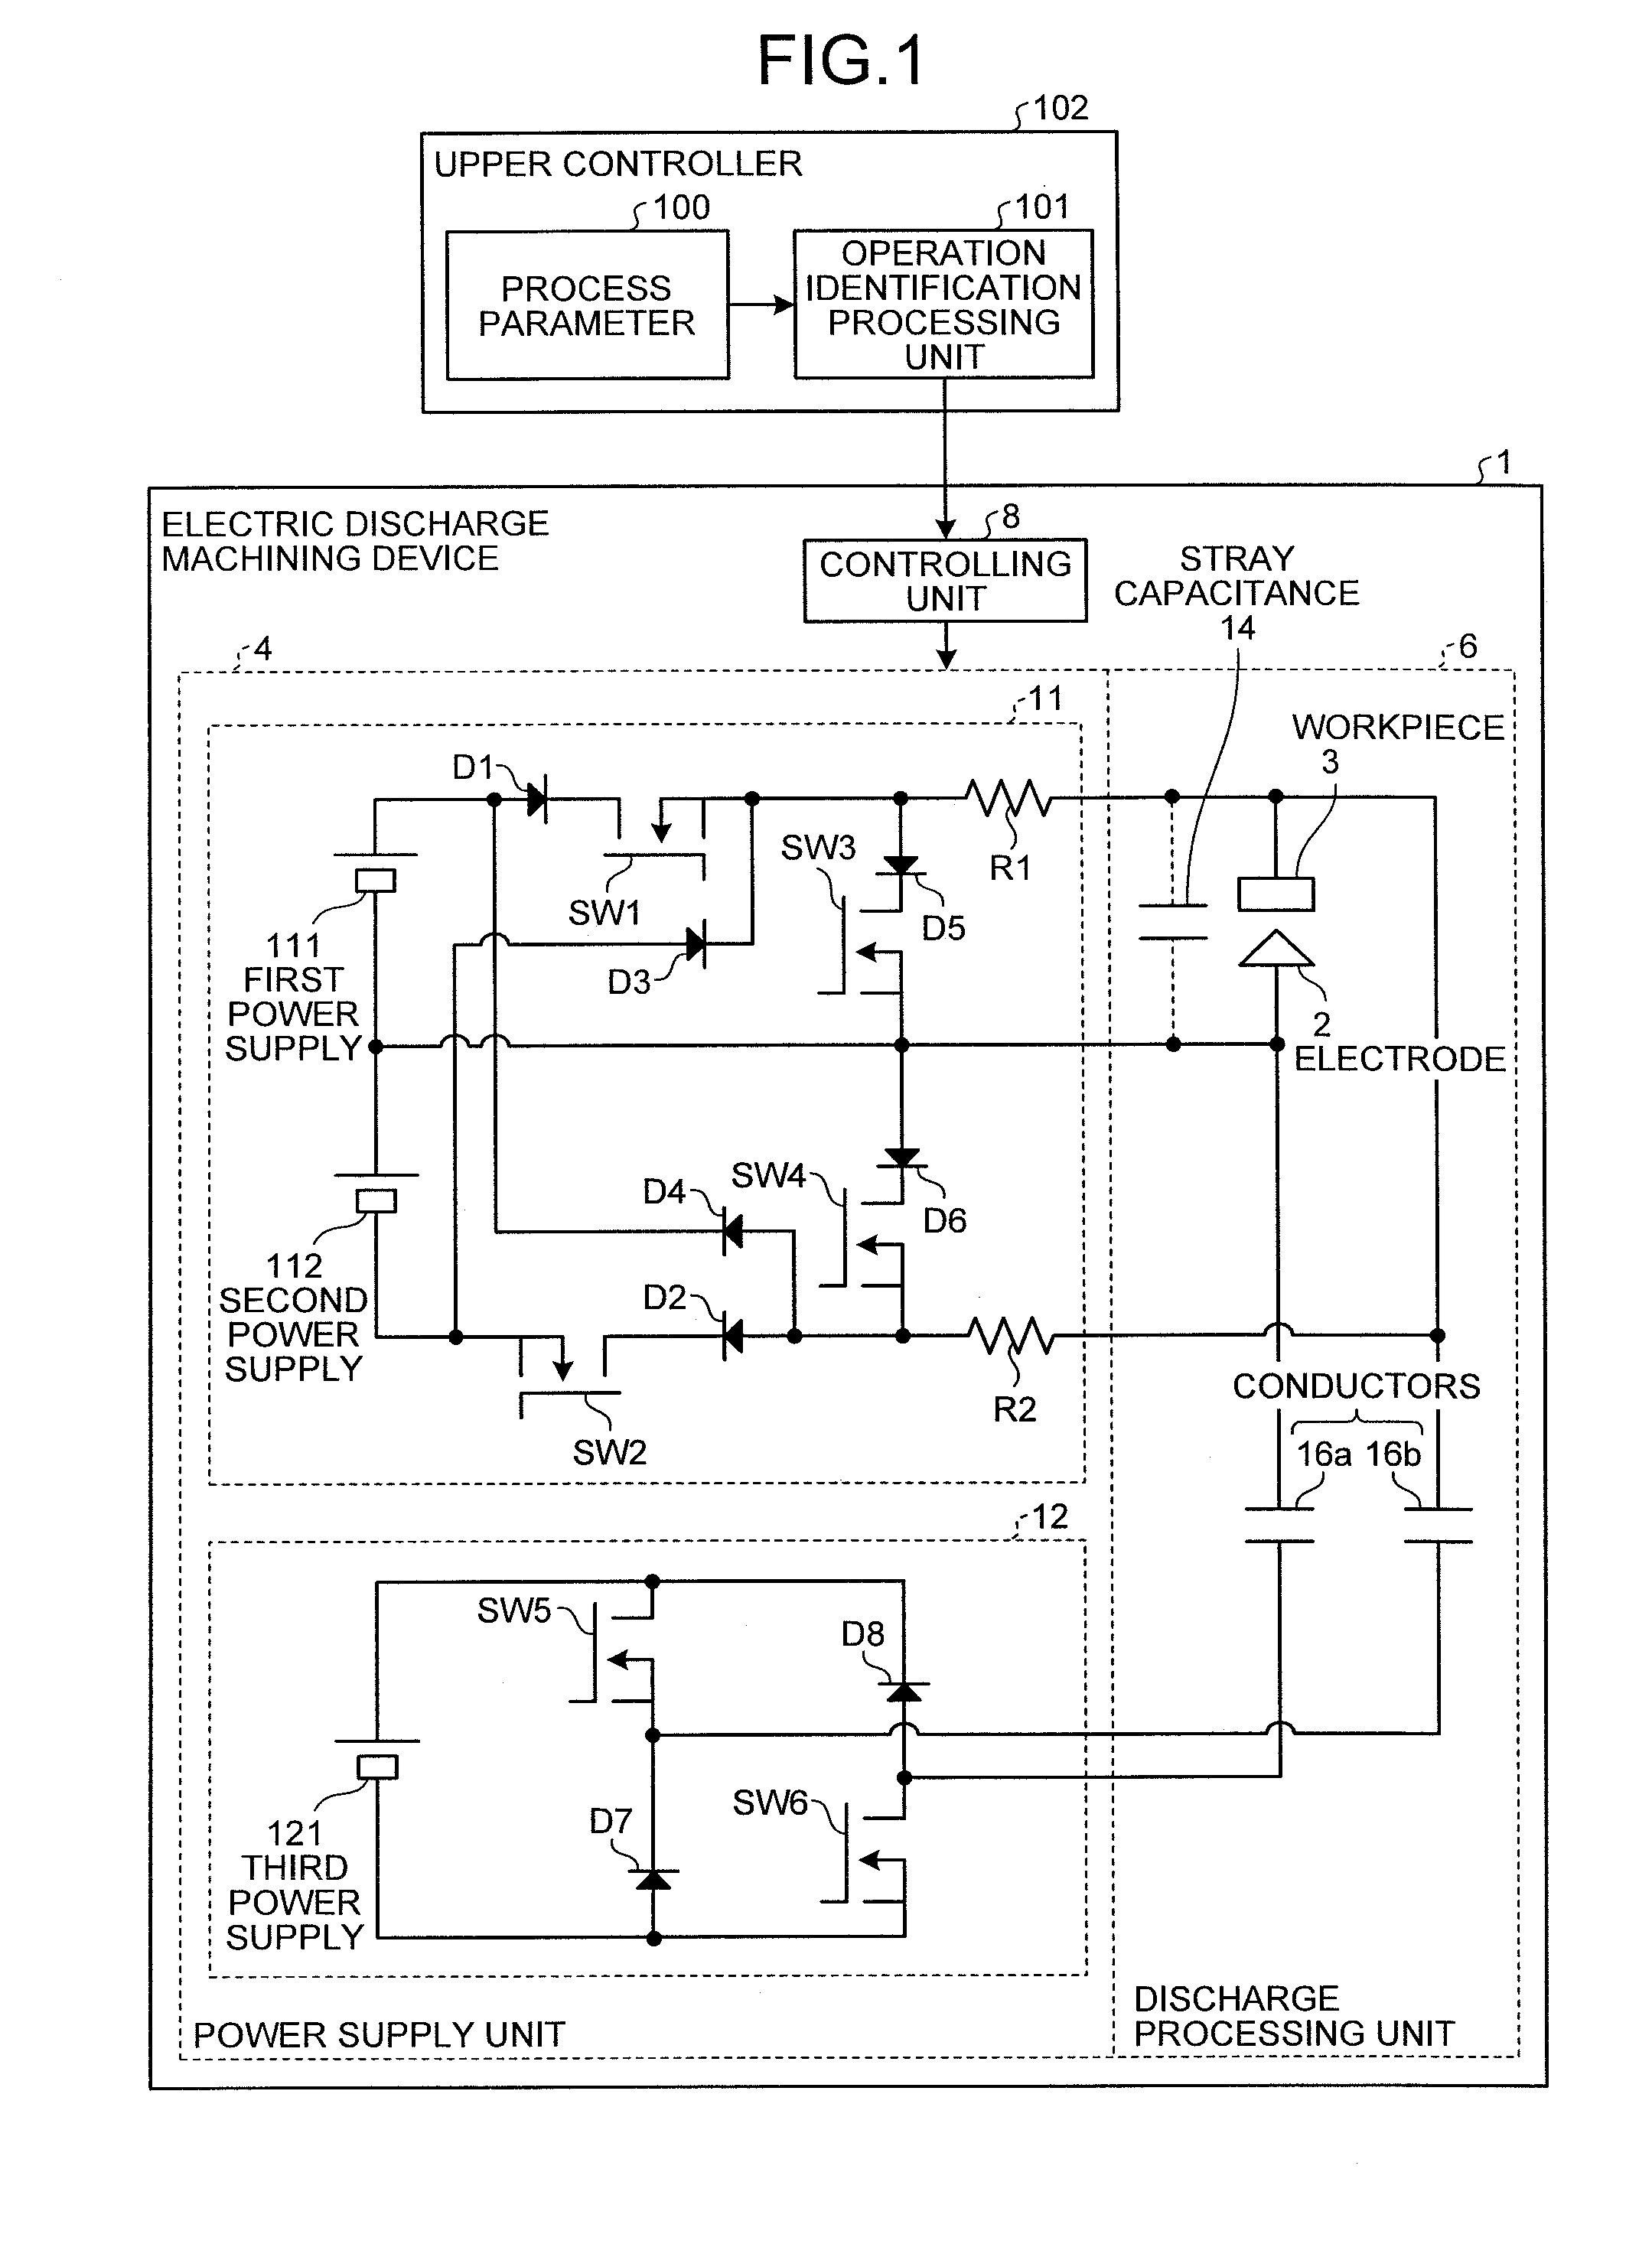 Electric discharge machining device